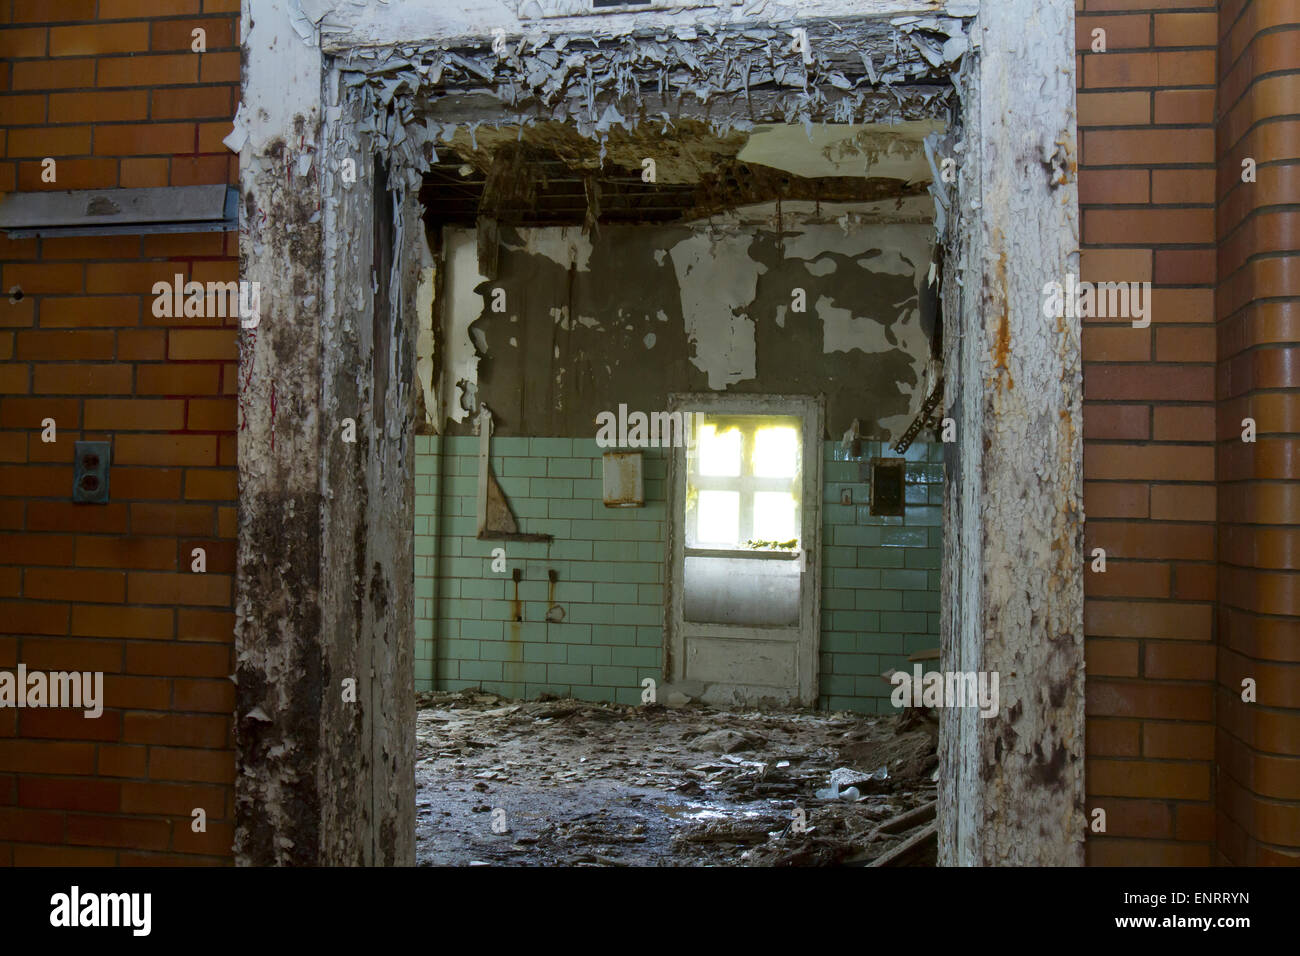 Paint peeling and chipping off doorway of room filled with debris from a decaying building. Stock Photo